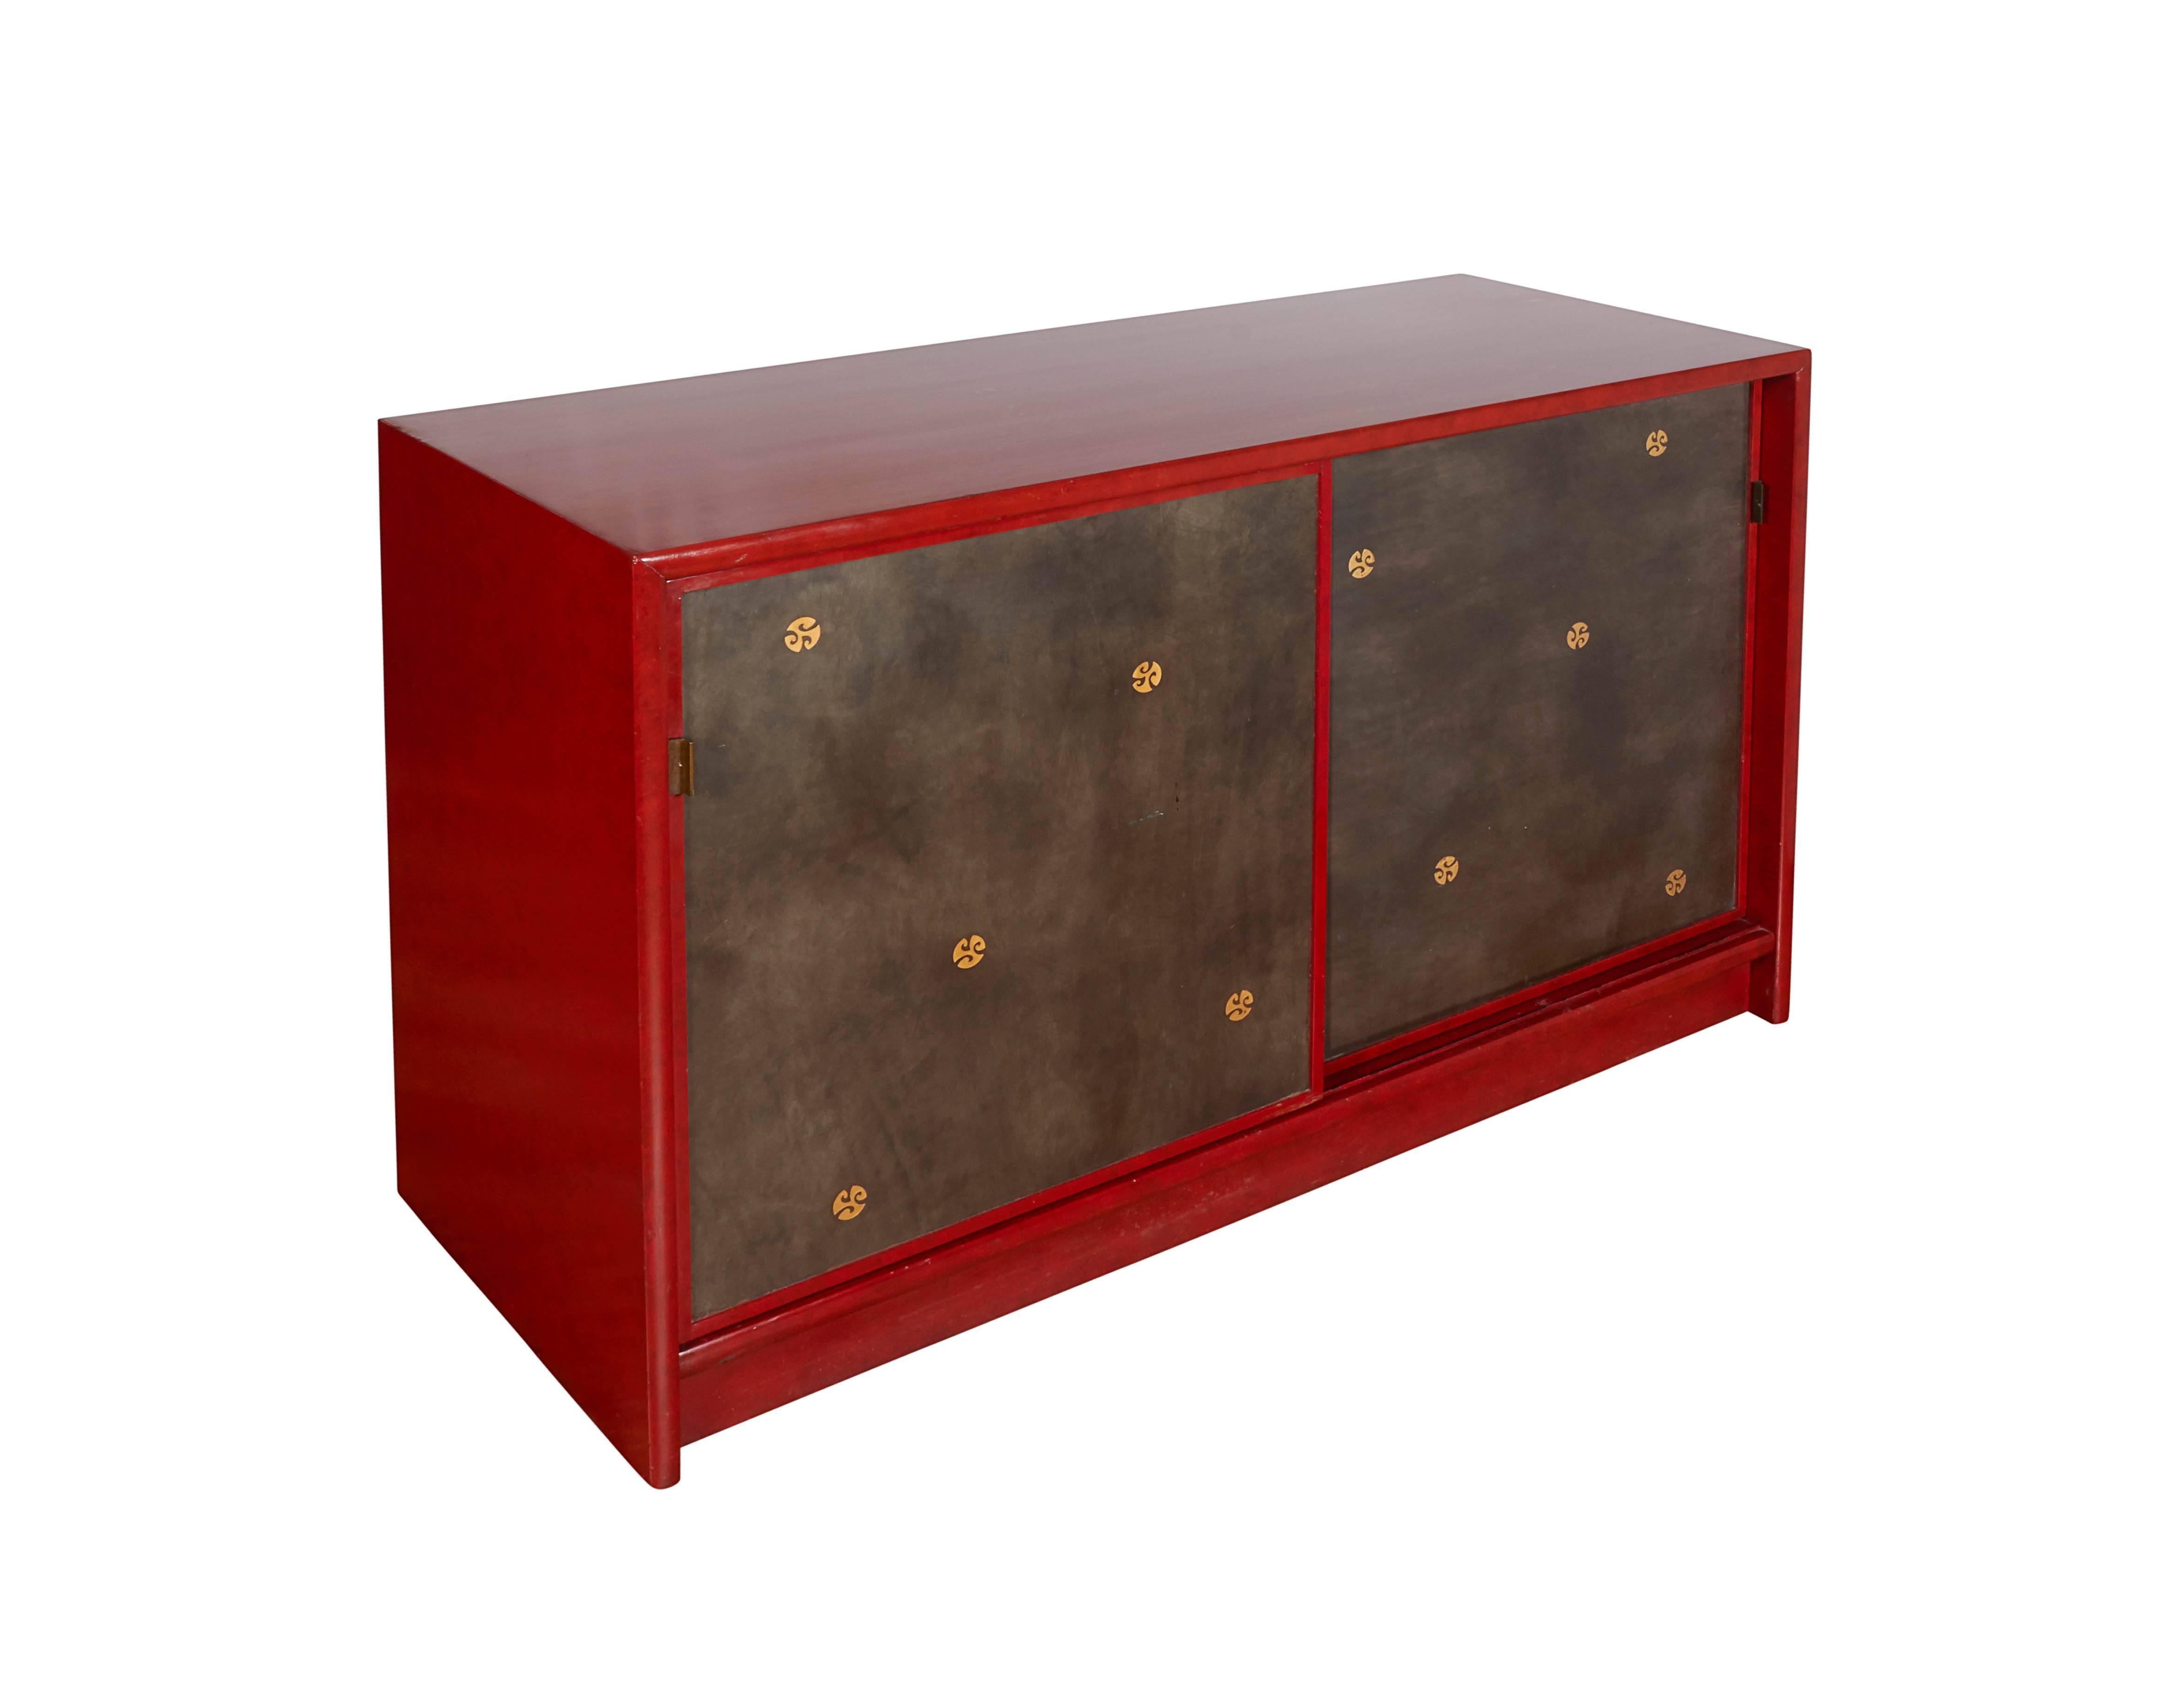 A pair of Mid-Century Modern Asian inspired cabinets or sideboards, in the style of designer Tommi Parzinger, each with red lacquer finish, including sliding doors decorated with gilt medallions, the completely gilded interiors with shelving space.